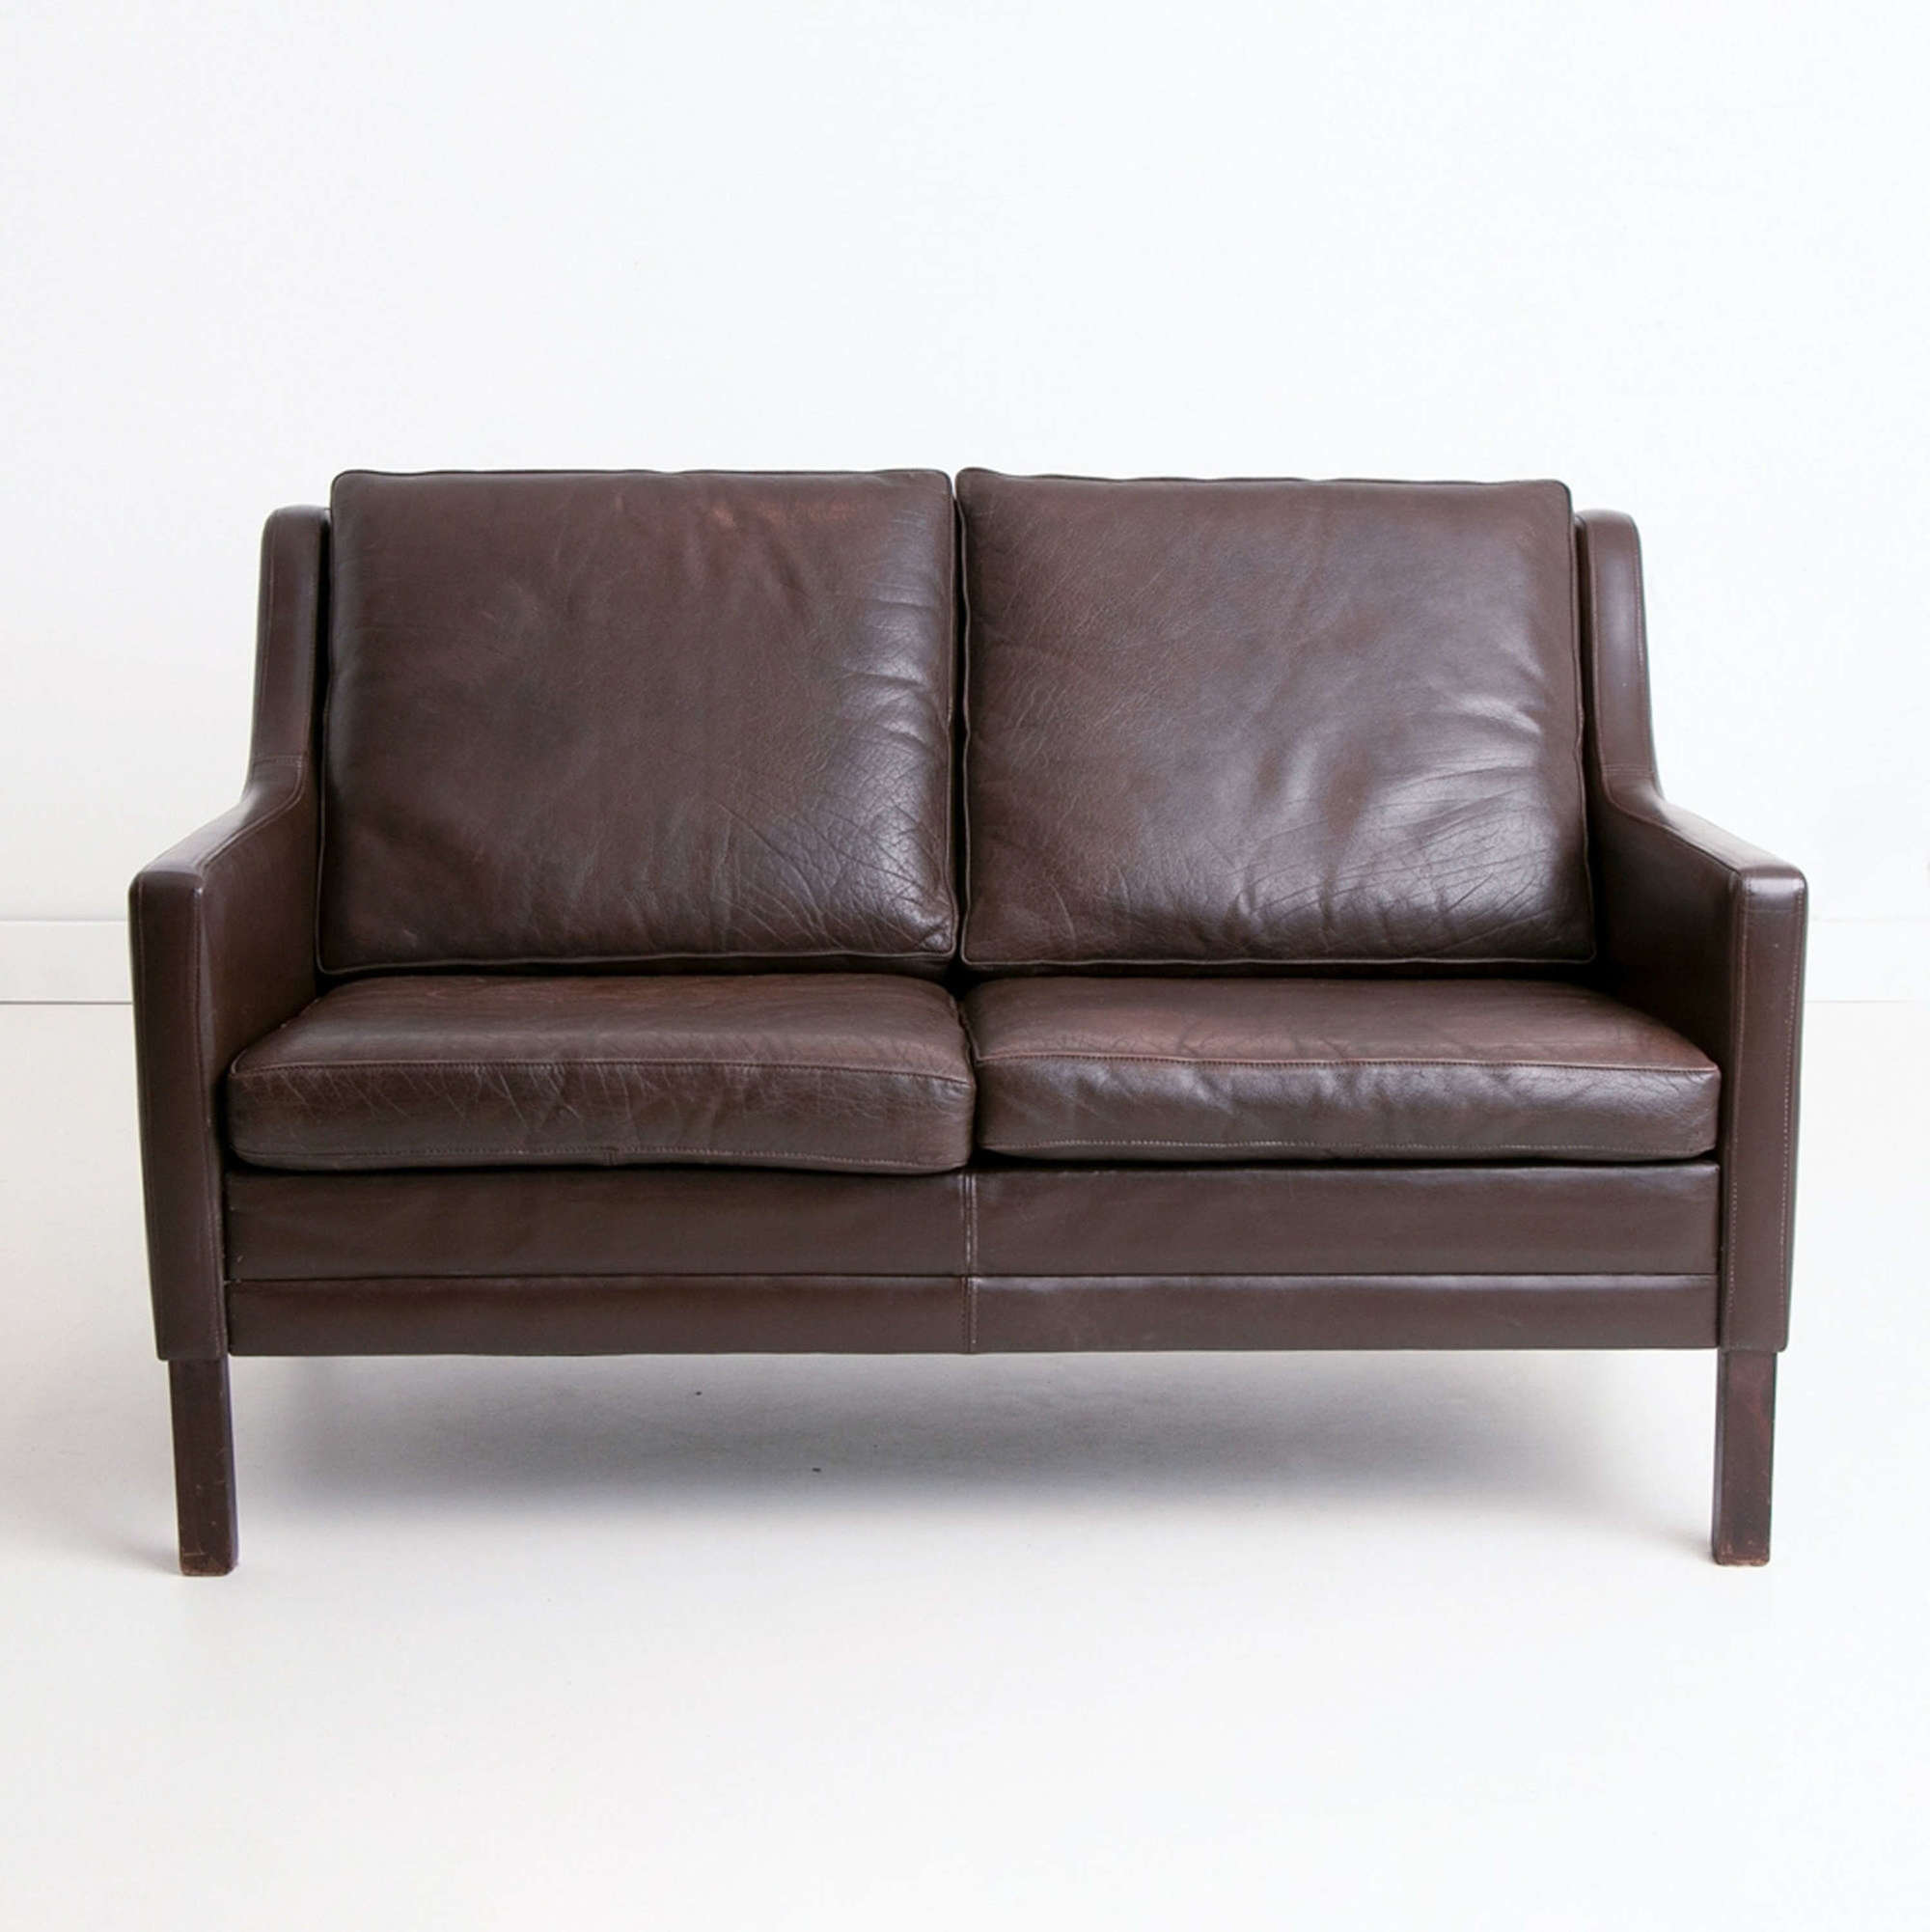 Vintage Danish Brown Leather Two Seater by Mogens Hansen c.1960